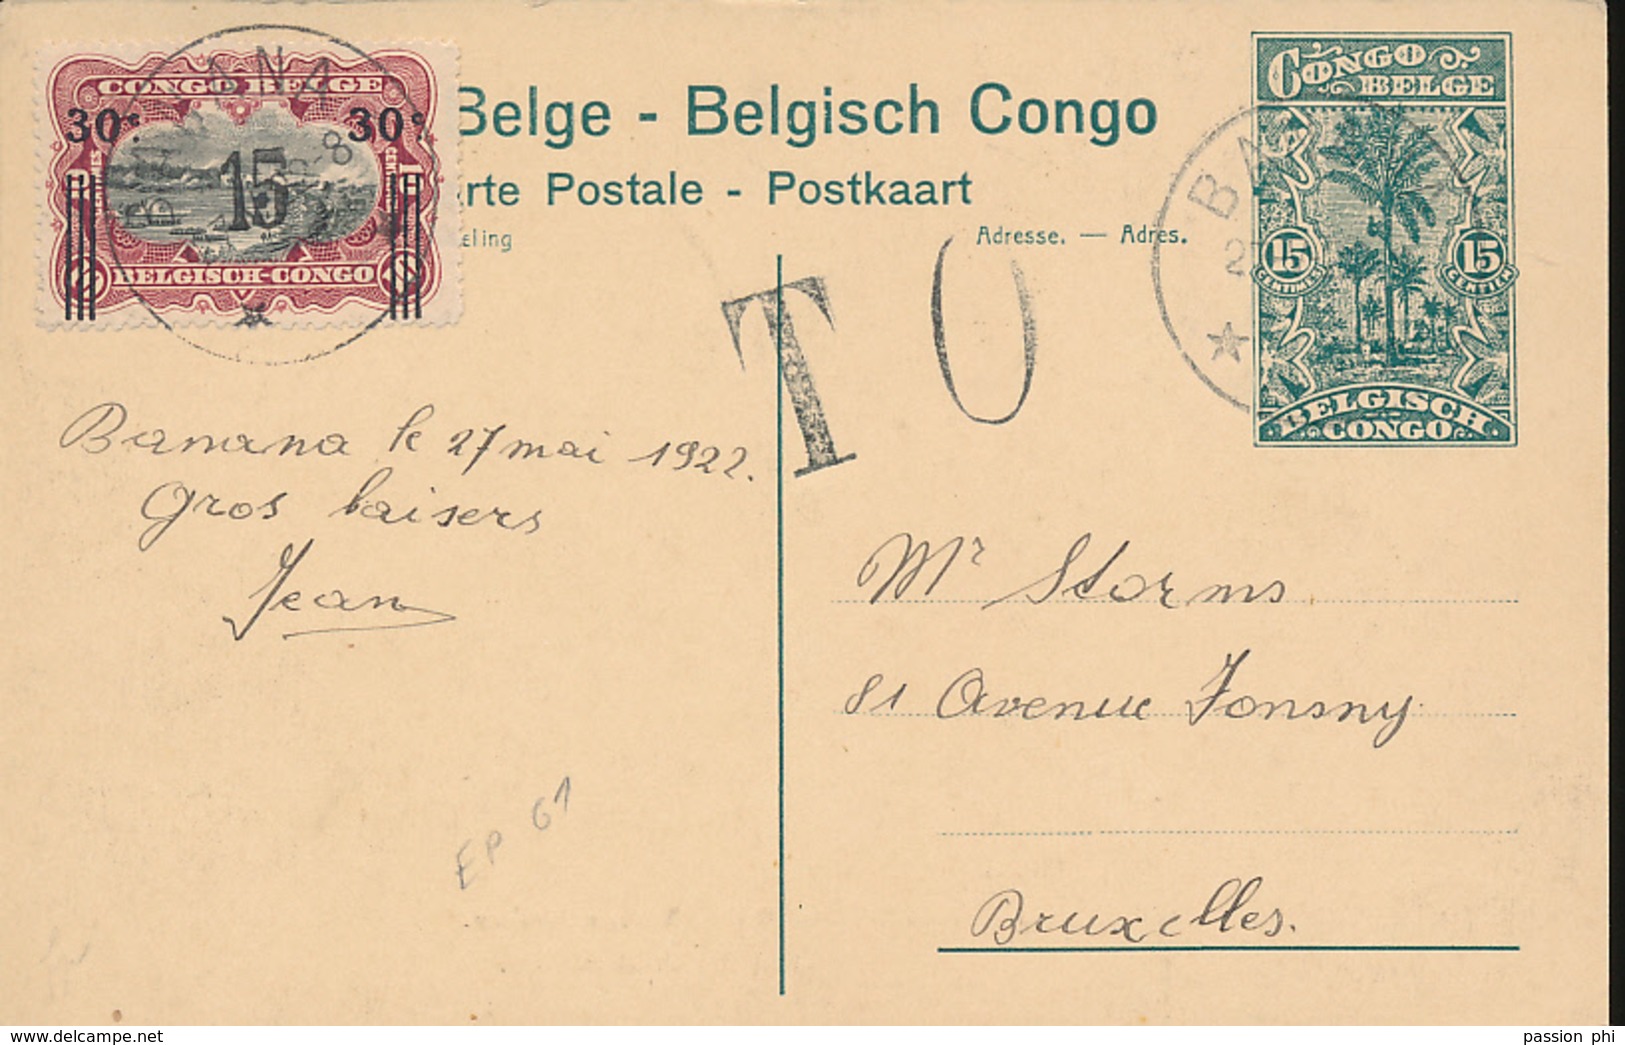 BELGIAN CONGO PPS 1922 ISSUE STIBBE 61 VIEW 84 USED BANANA 27.05.1922 UNOFFICIAL OVERPRINT ON THE STAMP O NUL + T - Entiers Postaux